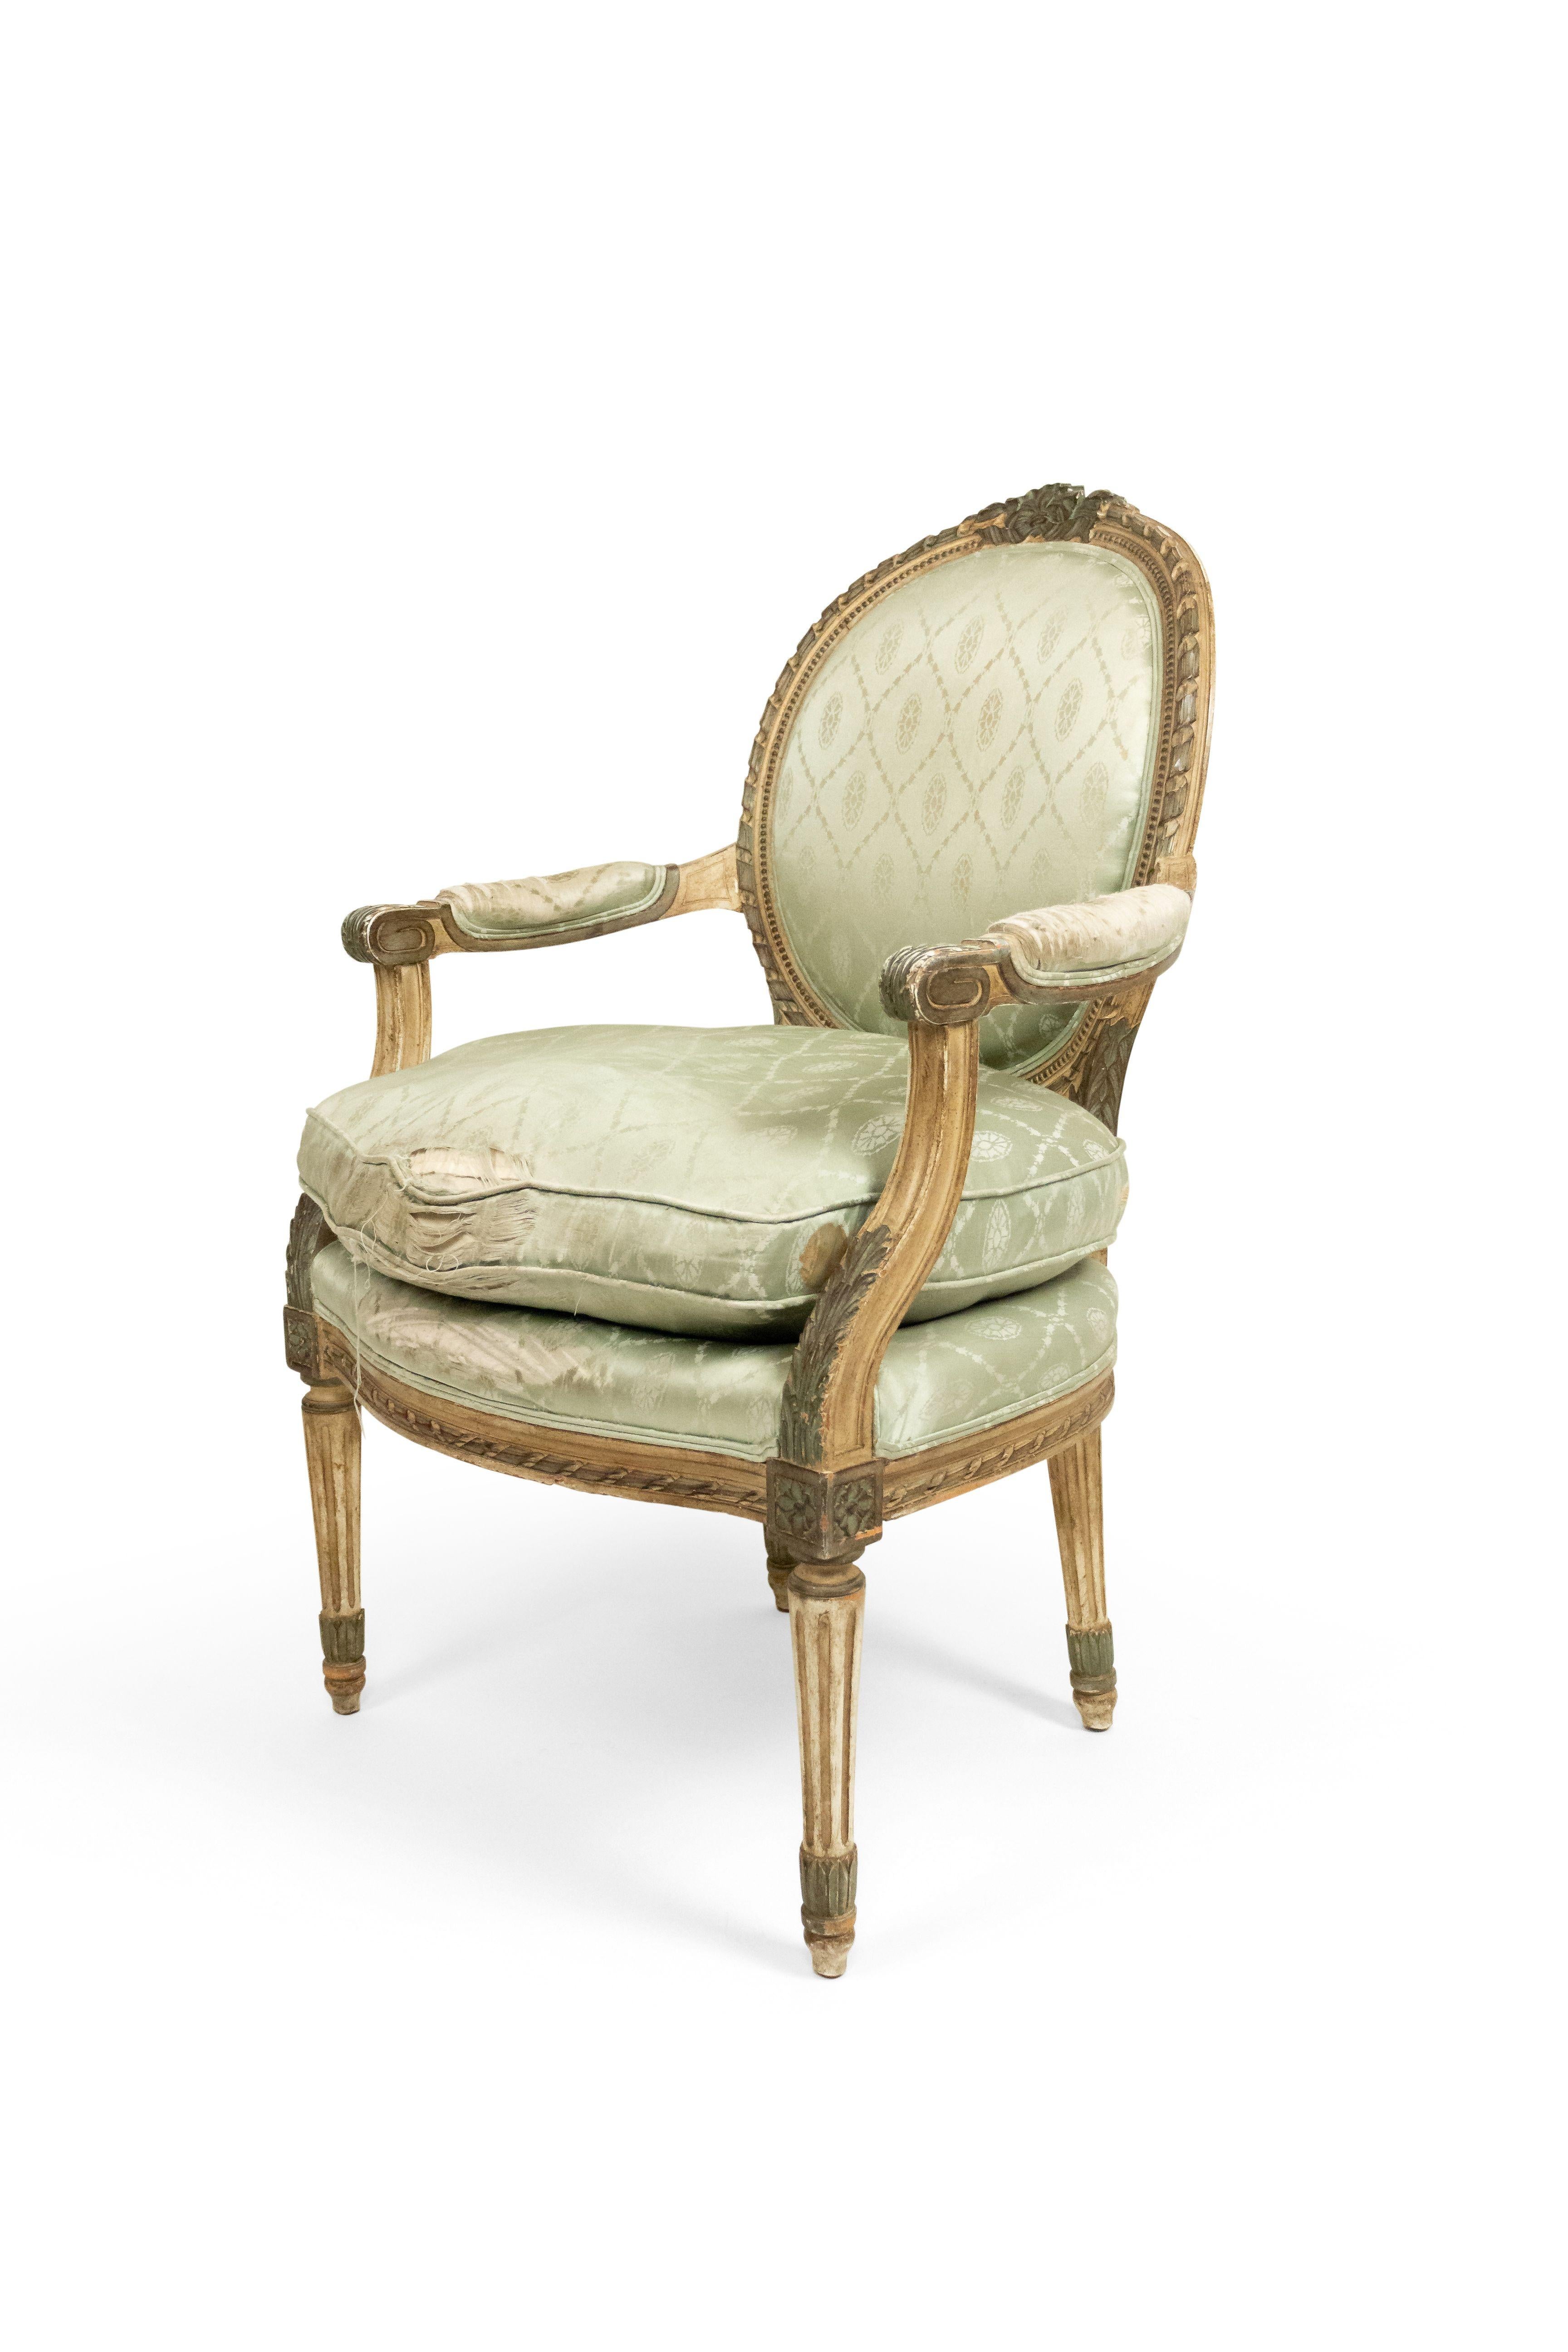 Pair of French Louis XVI-style (19th-20th century) grey painted arm chairs with oval back in pale green silk upholstery.